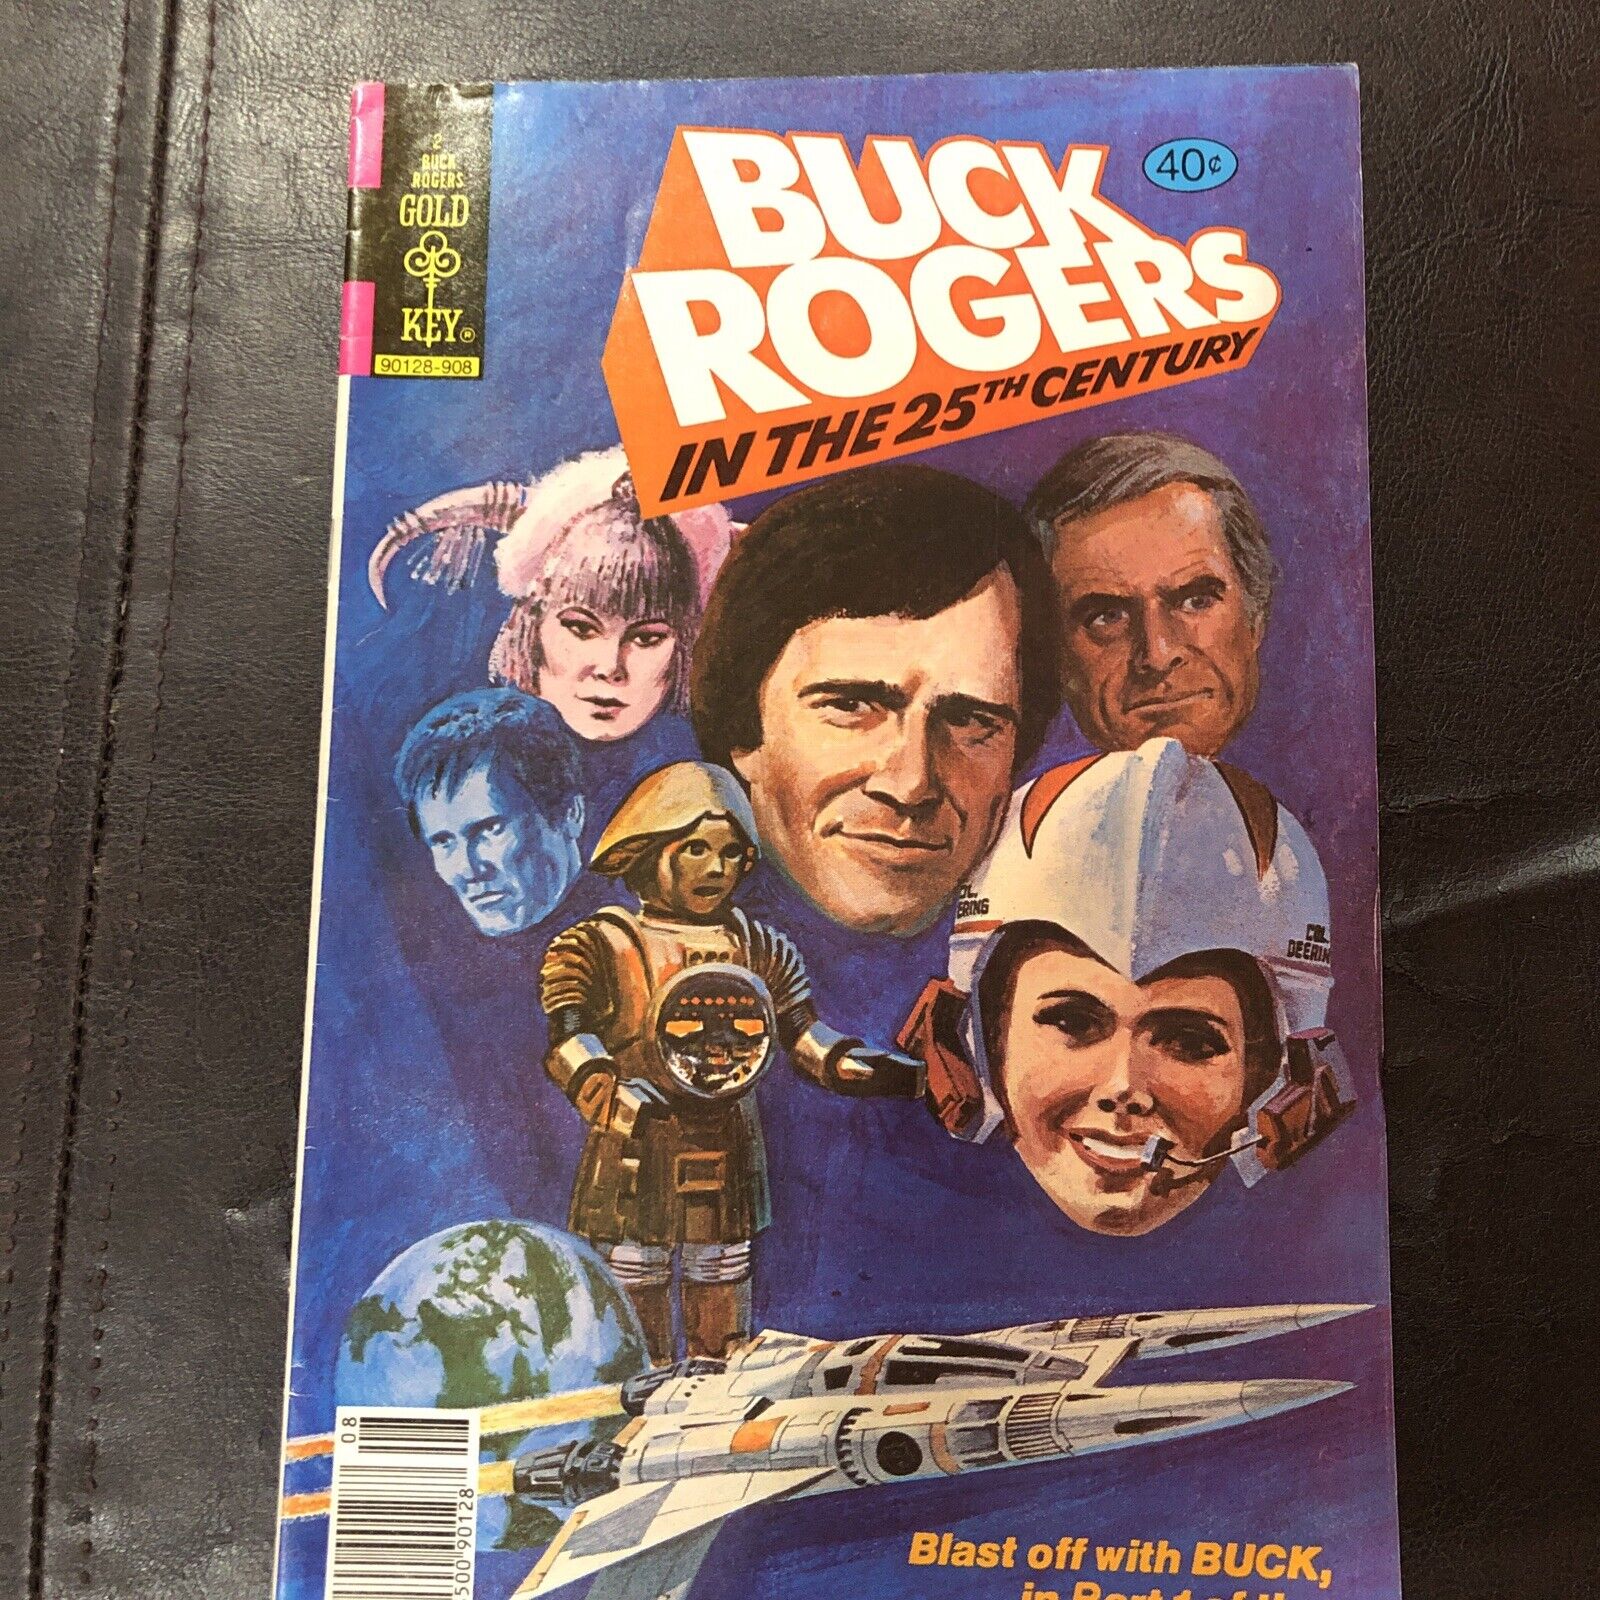 BUCK ROGERS IN THE 25TH CENTURY #2 GOLD KEY COMICS NEWSSTAND